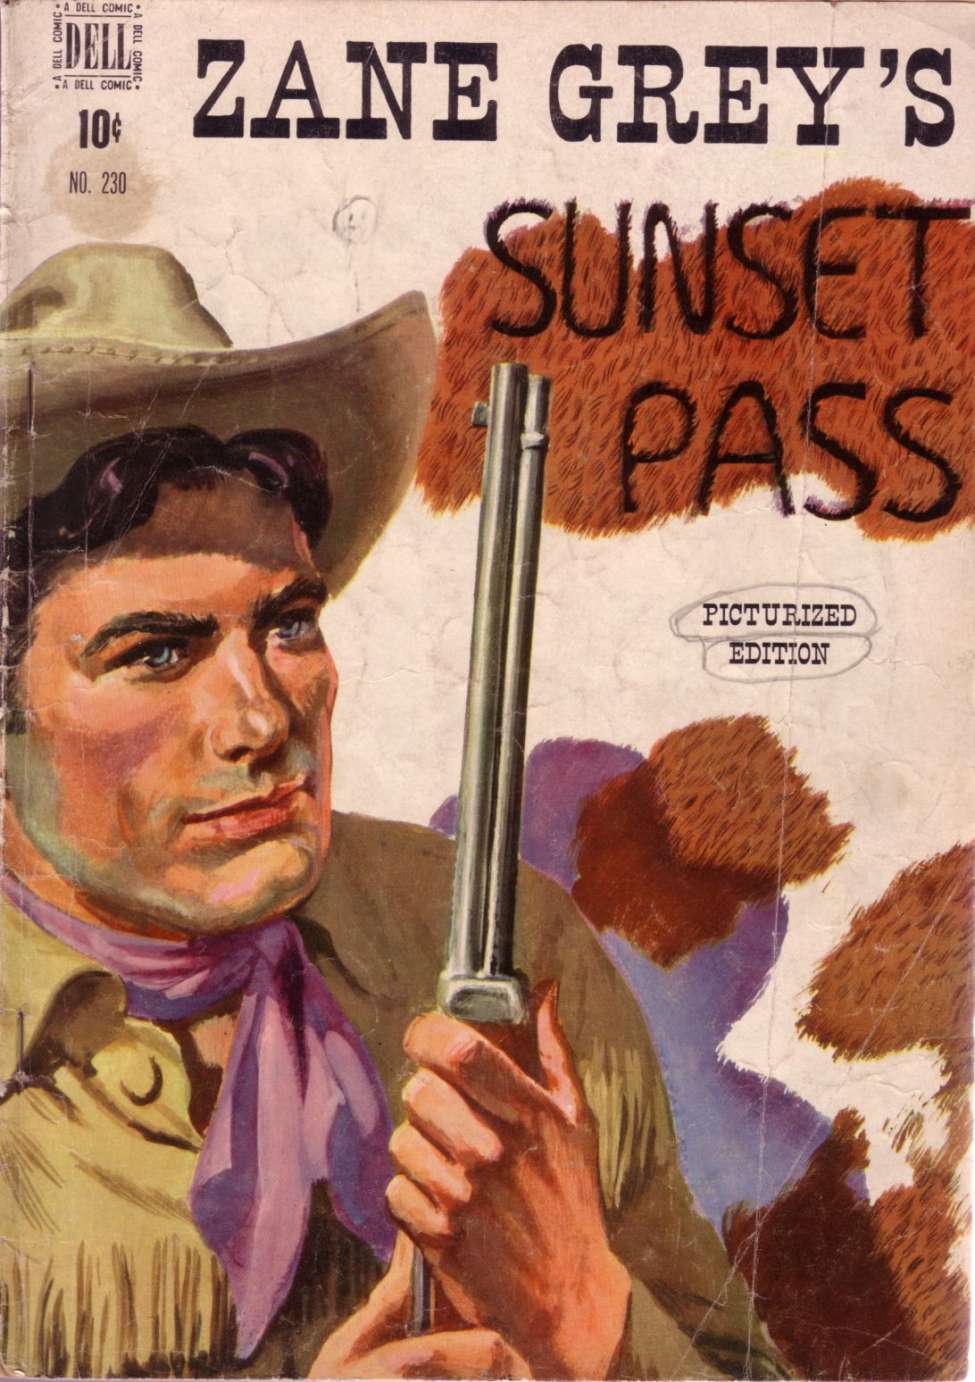 Book Cover For 0230 - Zane Grey's Sunset Pass